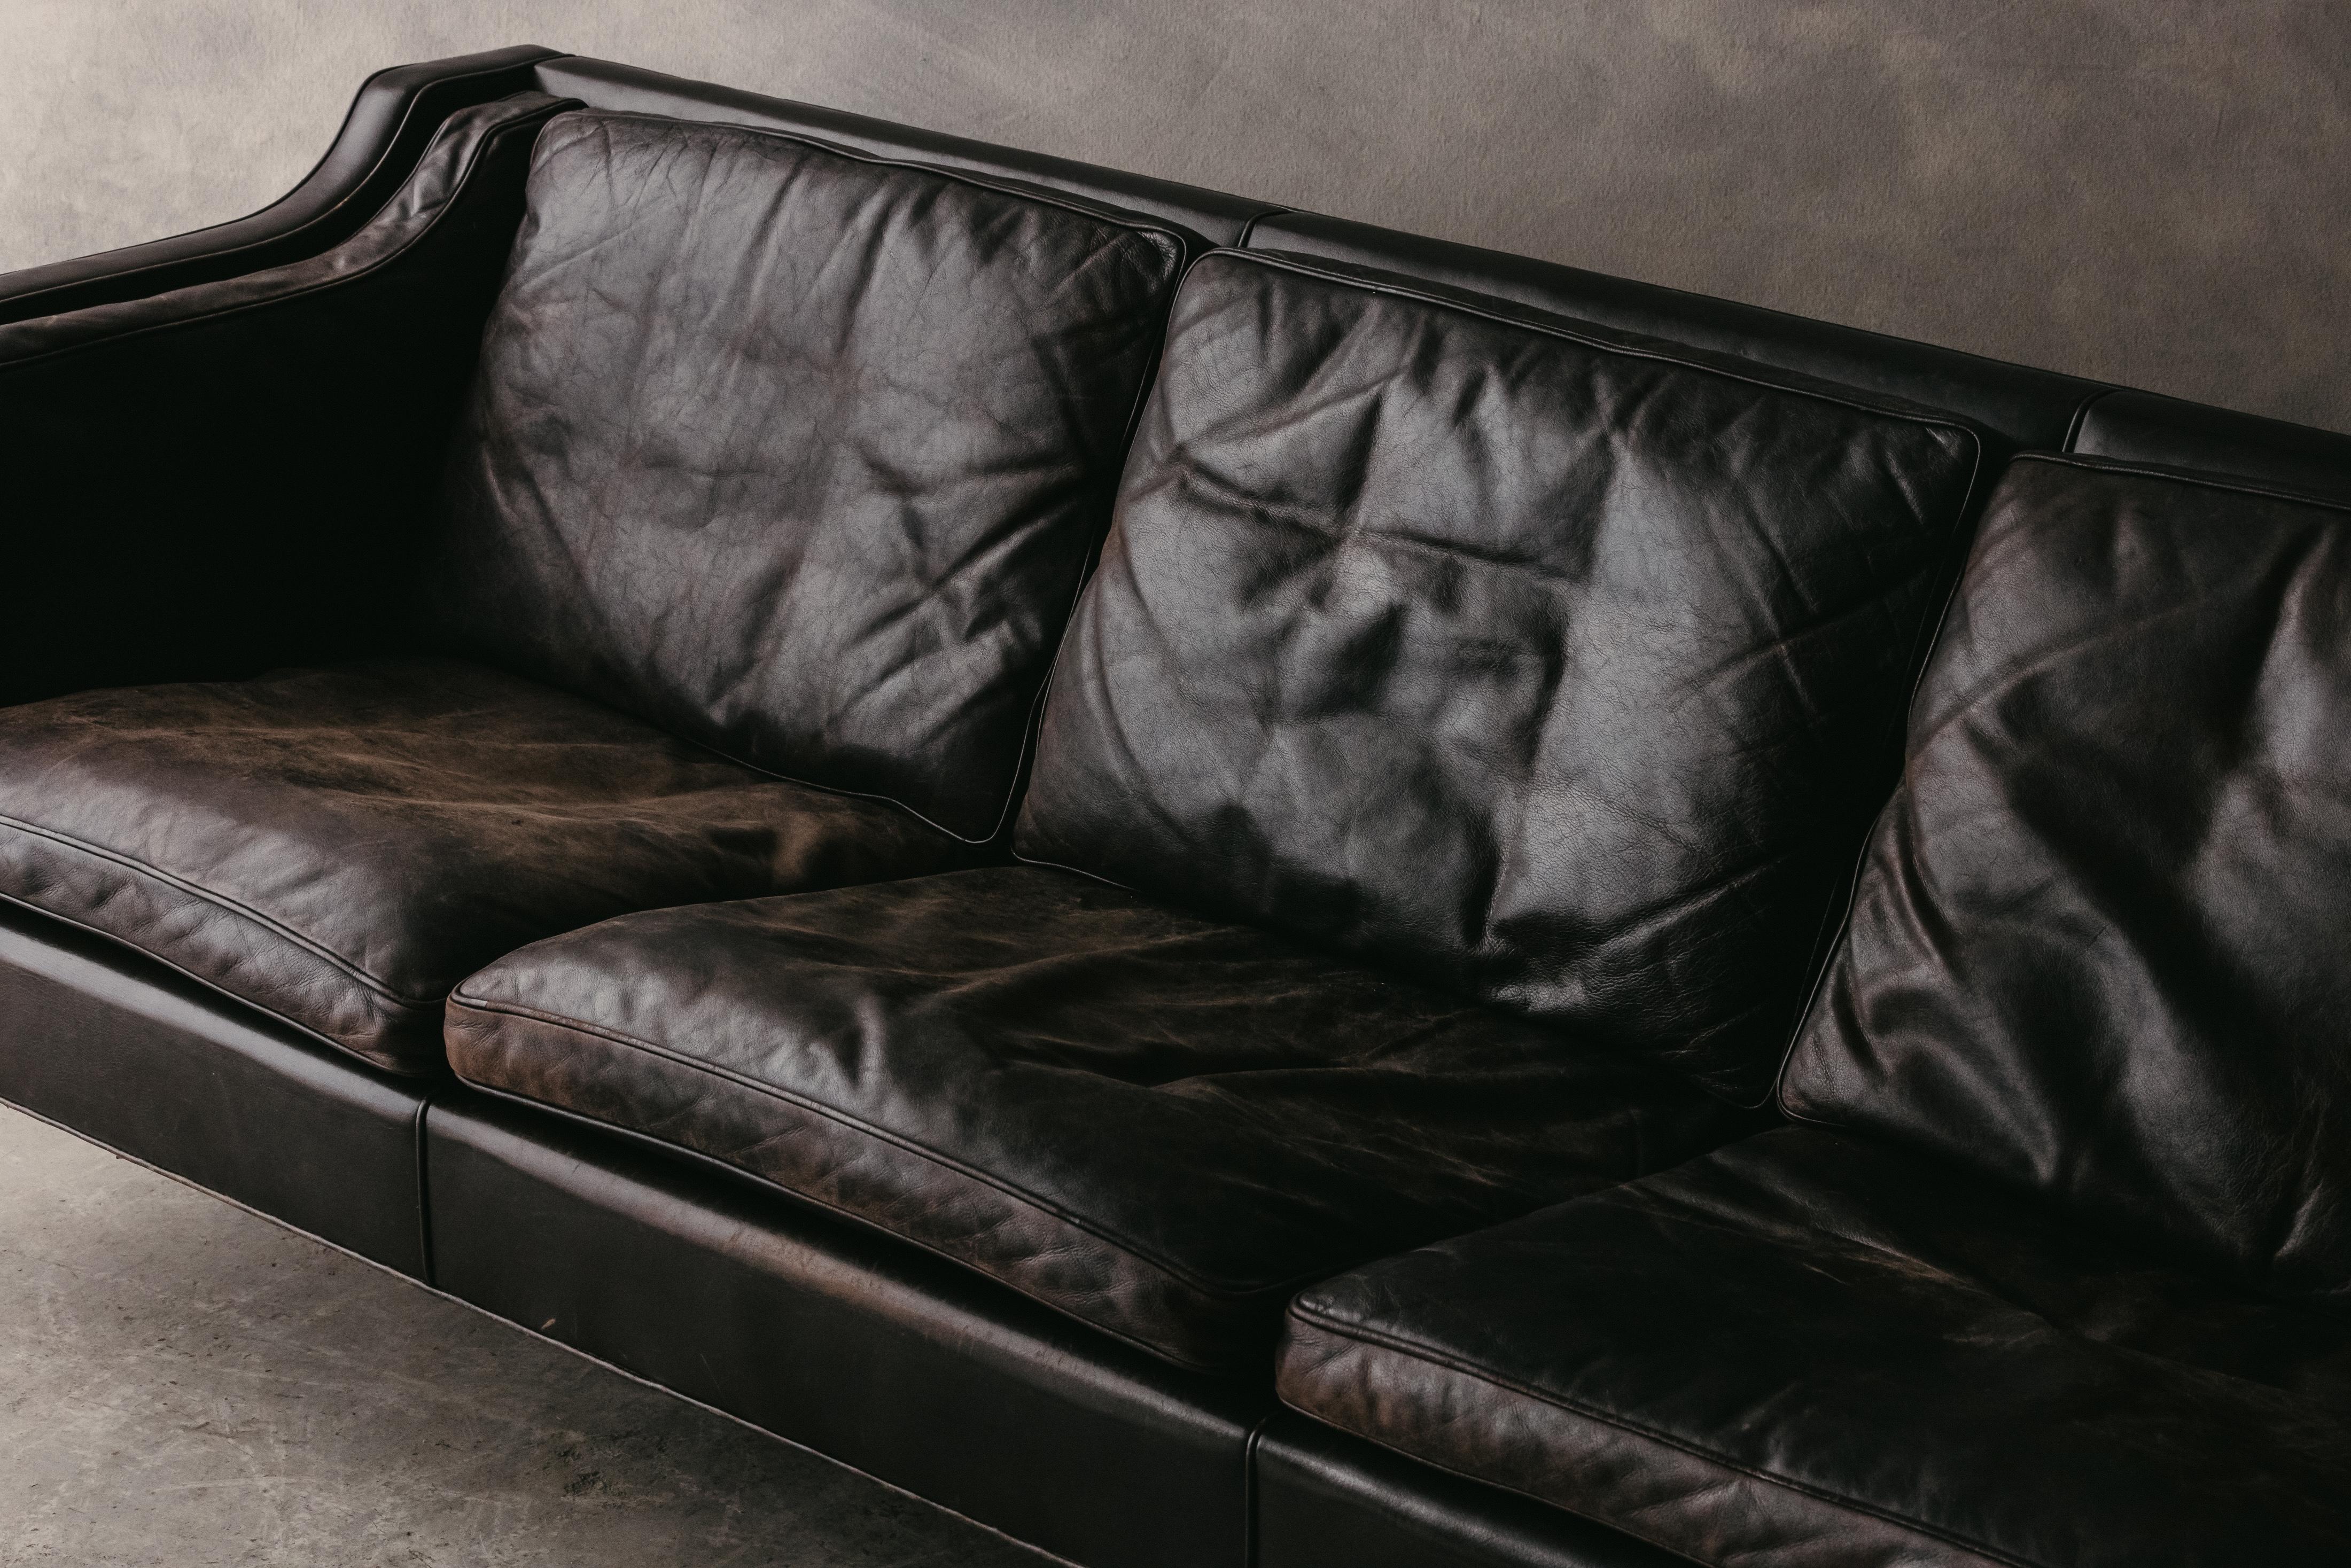 Vintage Midcentury Sofa Designed by Børge Mogensen, Model 2213, Denmark, 1970s.  Original very dark brown leather upholstery with nice patina and use.  